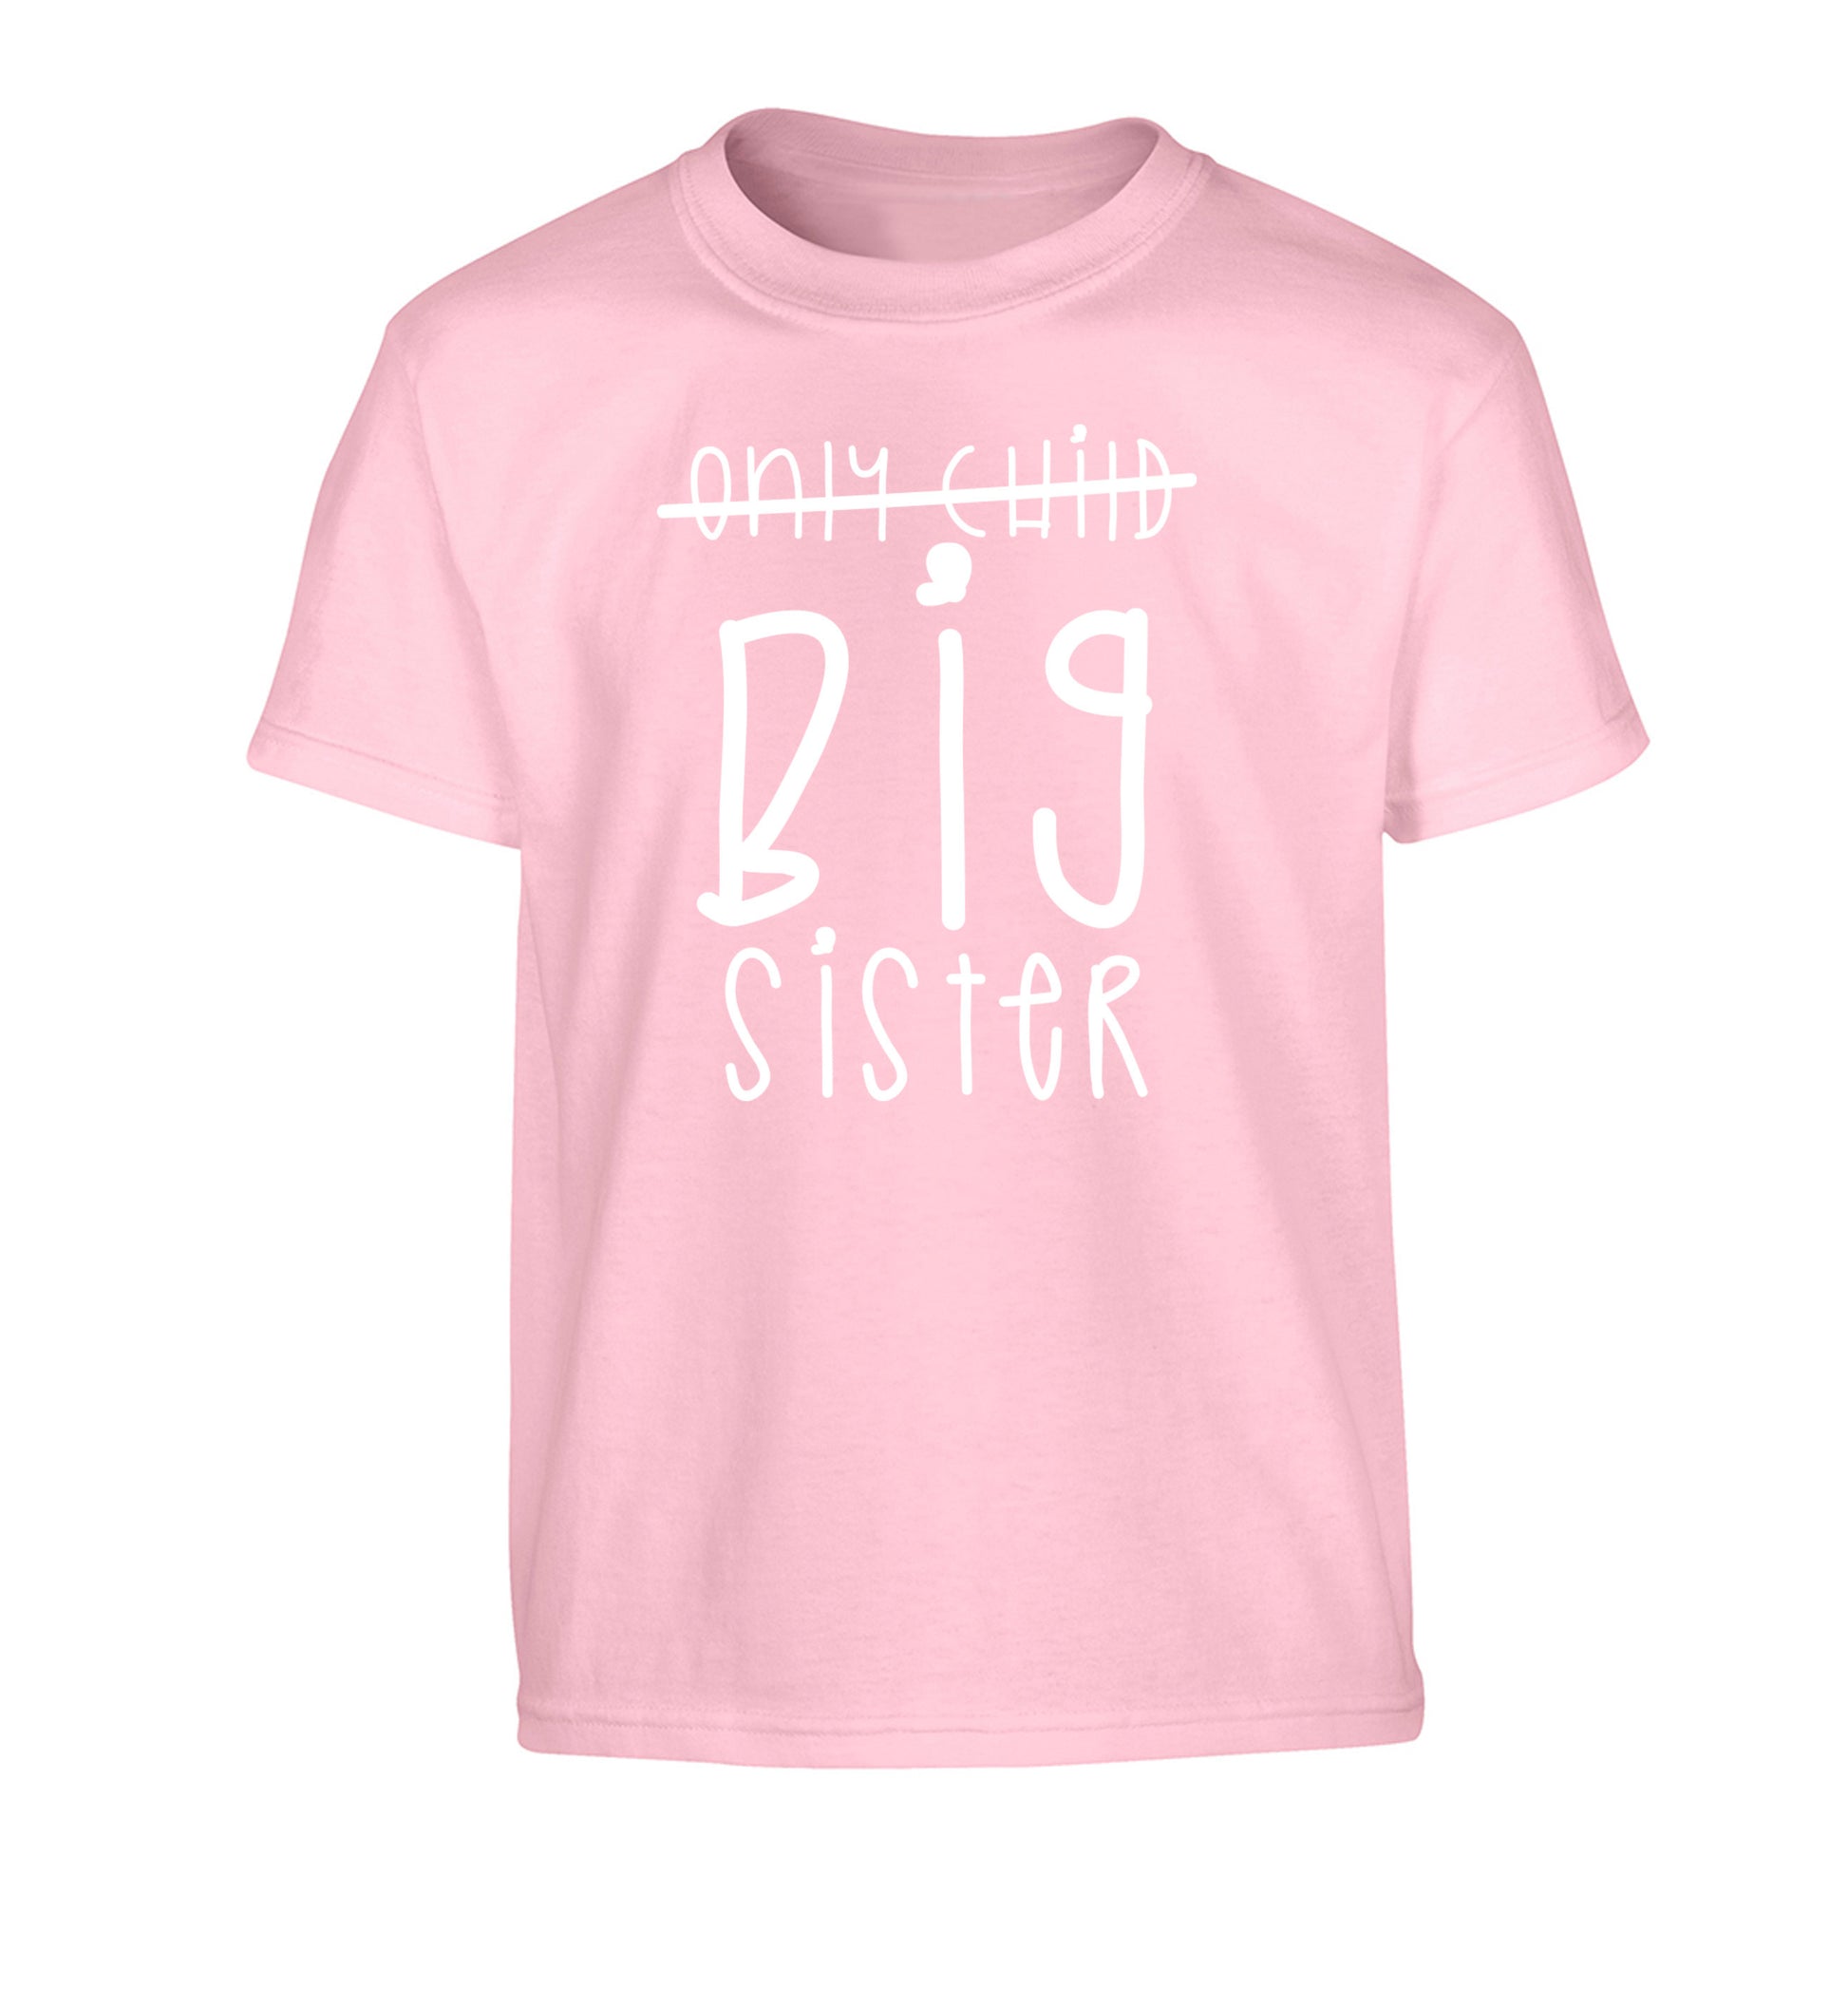 Only child big sister Children's light pink Tshirt 12-14 Years